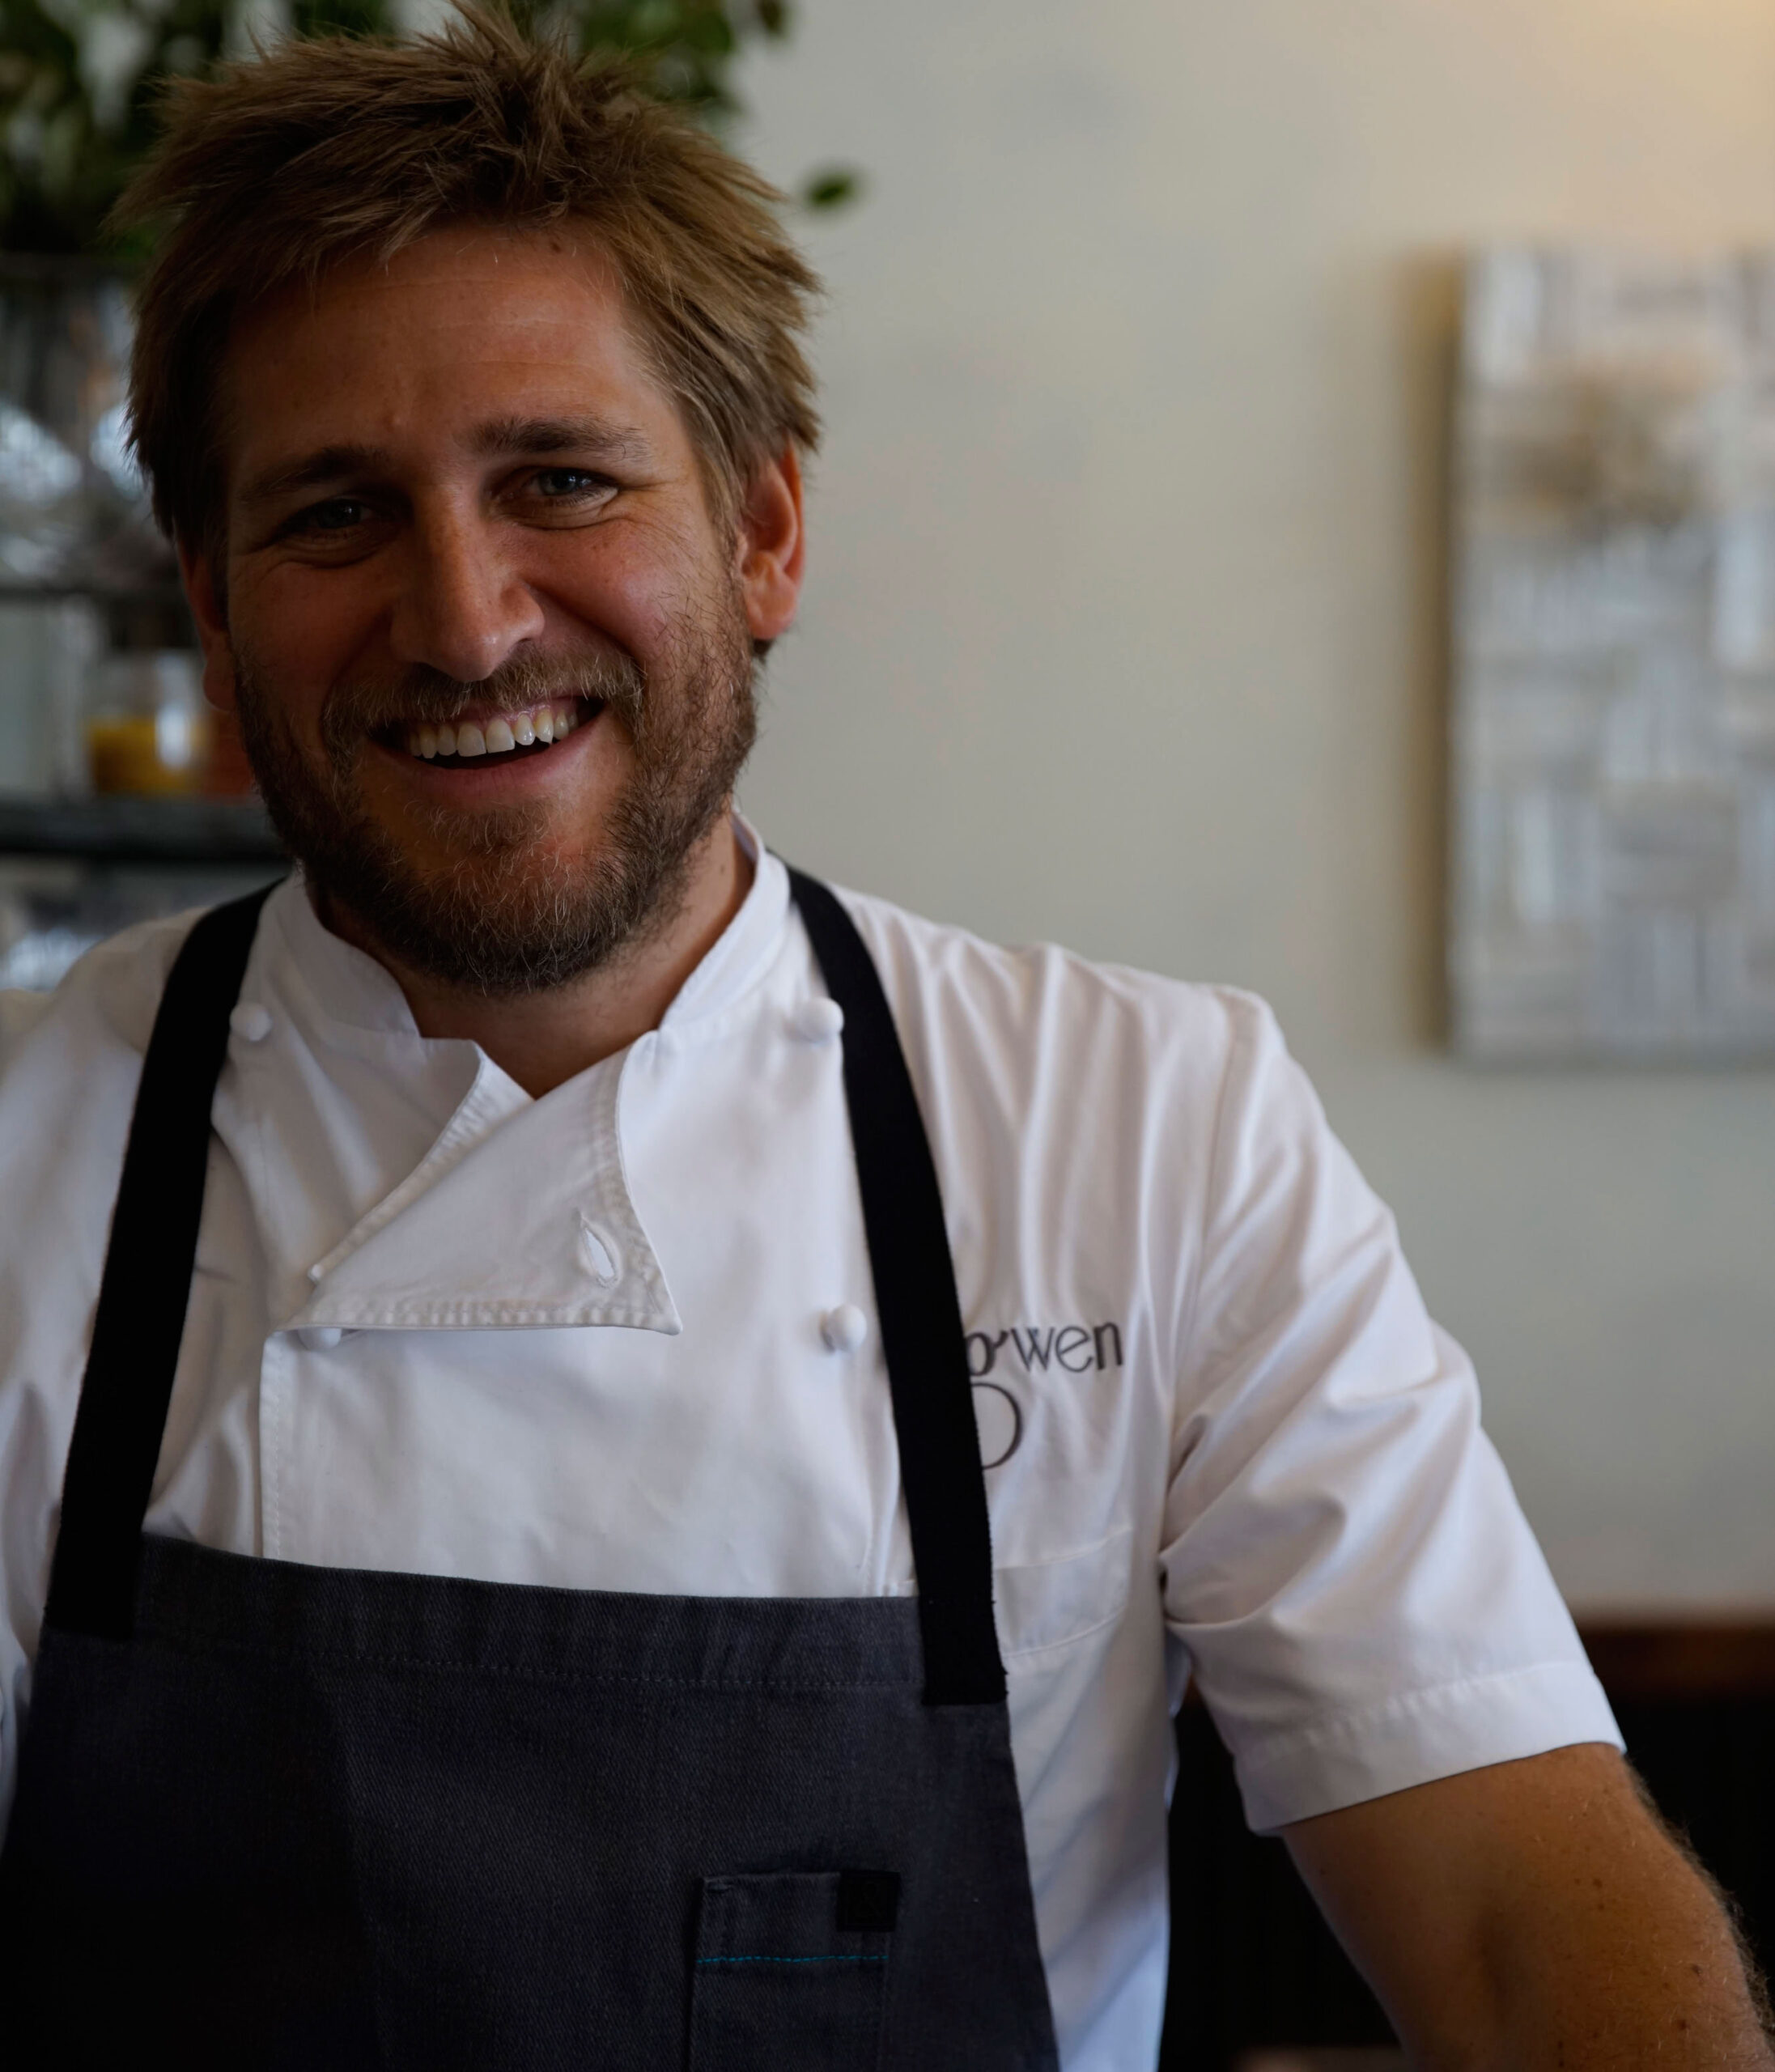 Recipes from Curtis Stone’s restaurant Gwen